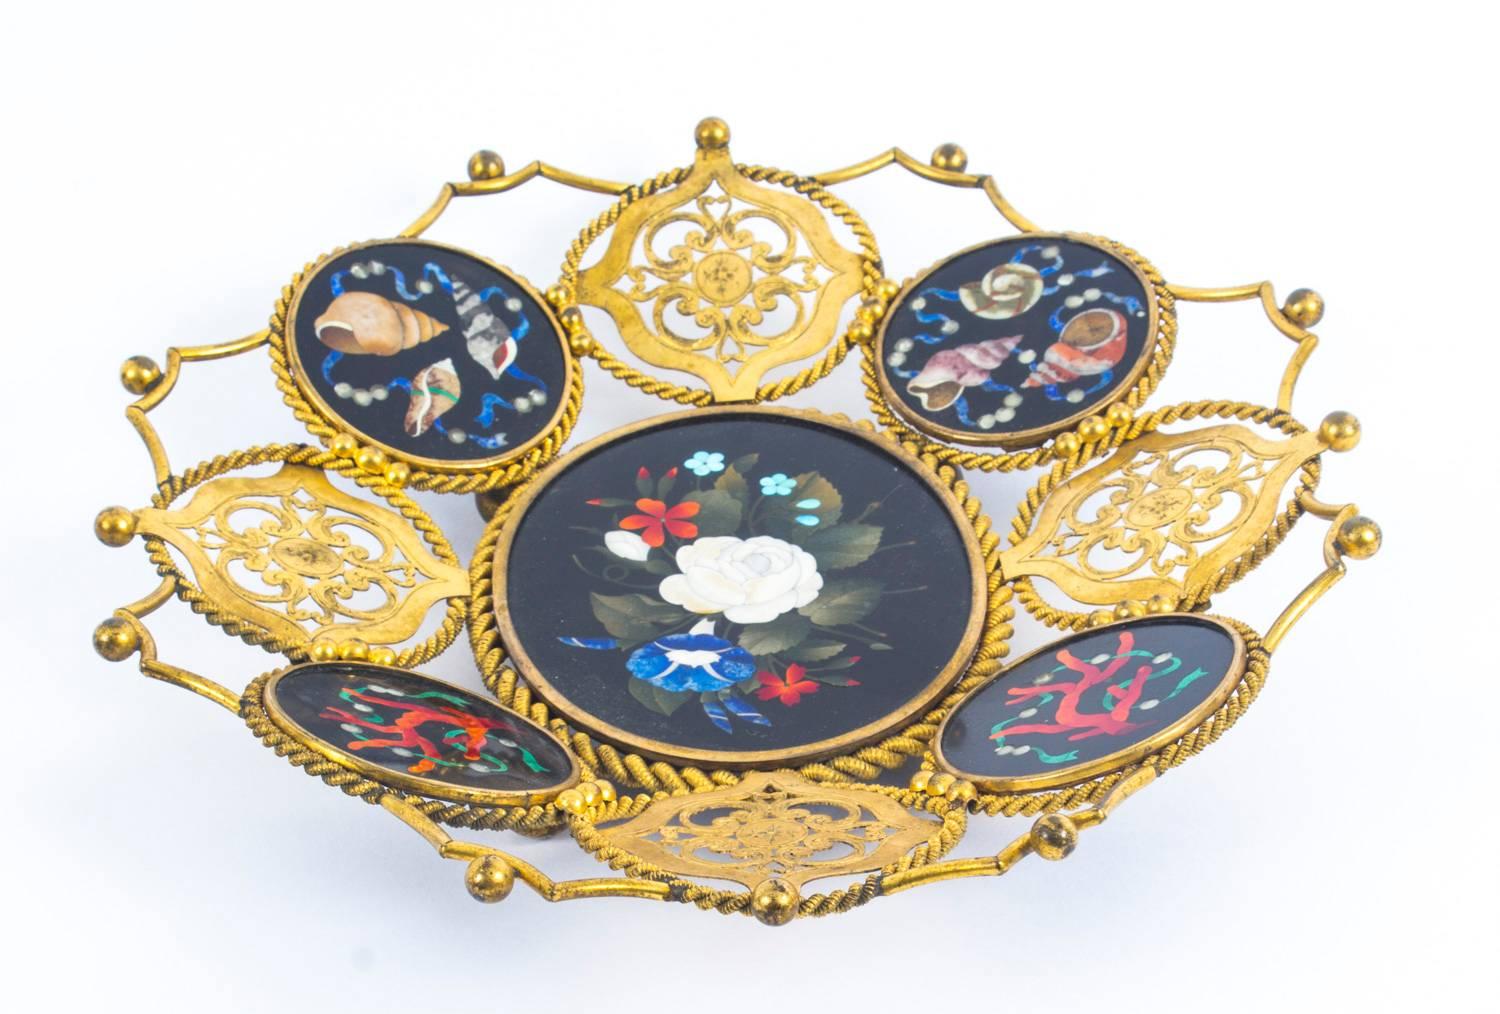 This is a superb quality antique Italian Pietra Dura mounted gilt bronze basket dating from the late 19th century.

Of striking pierced form set with four highly decorative Pietra Dura roundels depicting various corals and sea crustaceans, centred